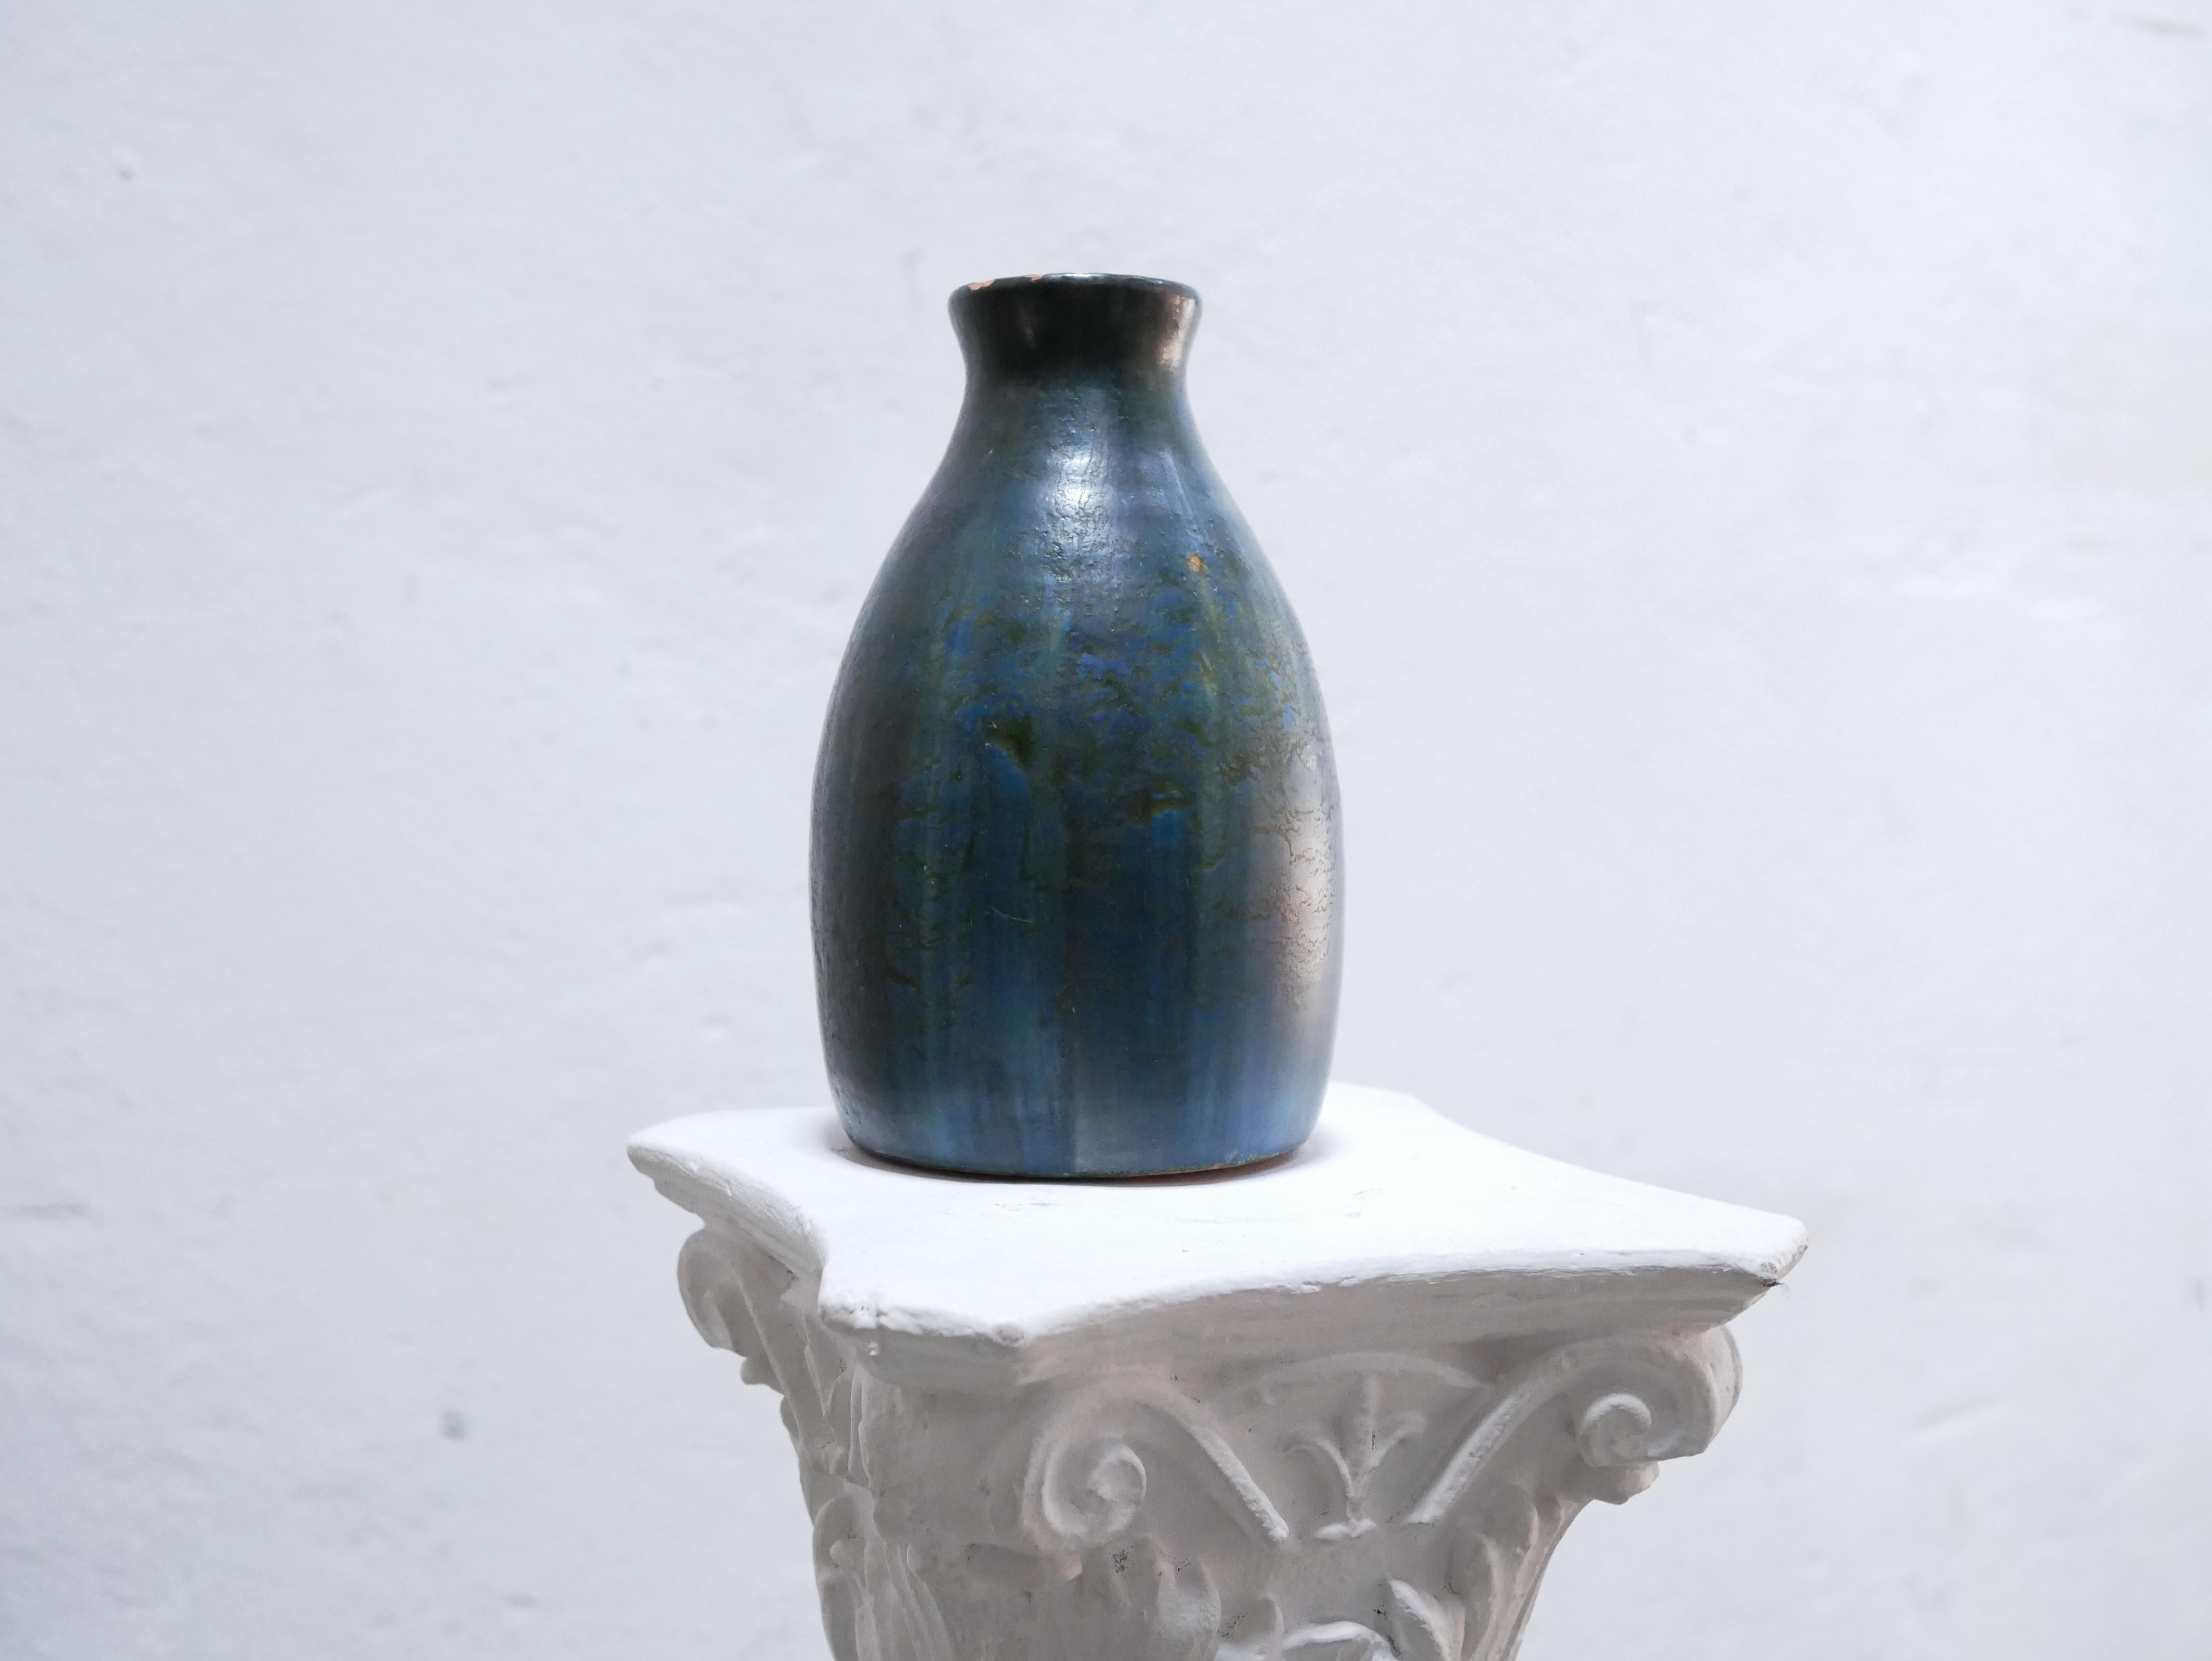 Stoneware vase dating from 1969.

With its modern shape and pretty color, this vase will be perfect in a natural, refined and delicate decoration.
We simply imagine it placed on a shelf or a piece of furniture, decorated with a few dried flowers or